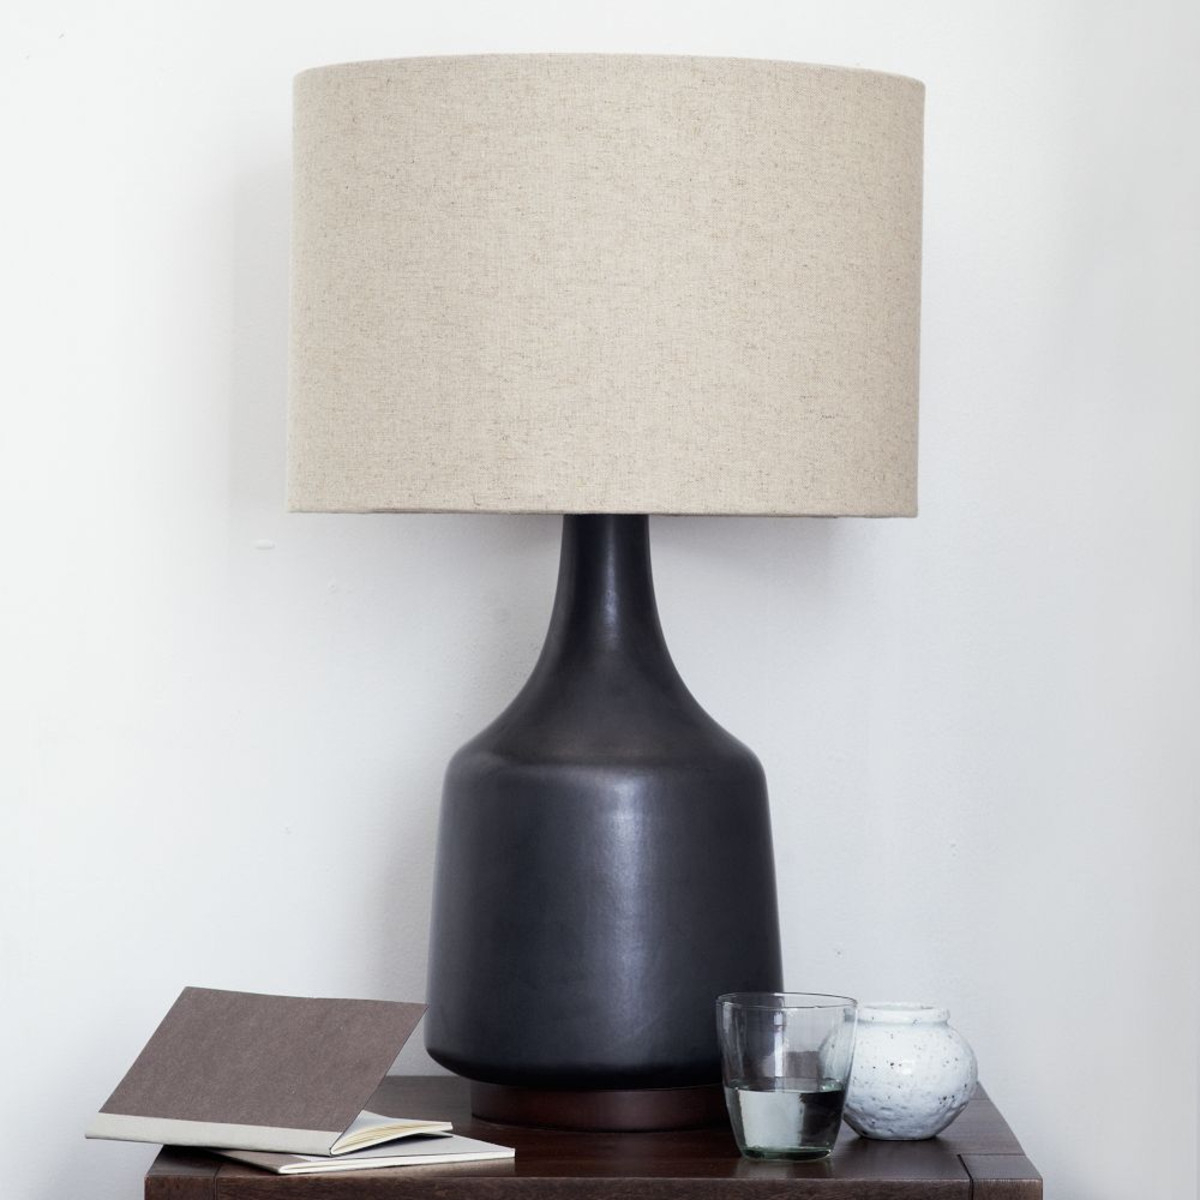 Oval Black Table Lamps Disacode Home Design From Special with regard to dimensions 1200 X 1200